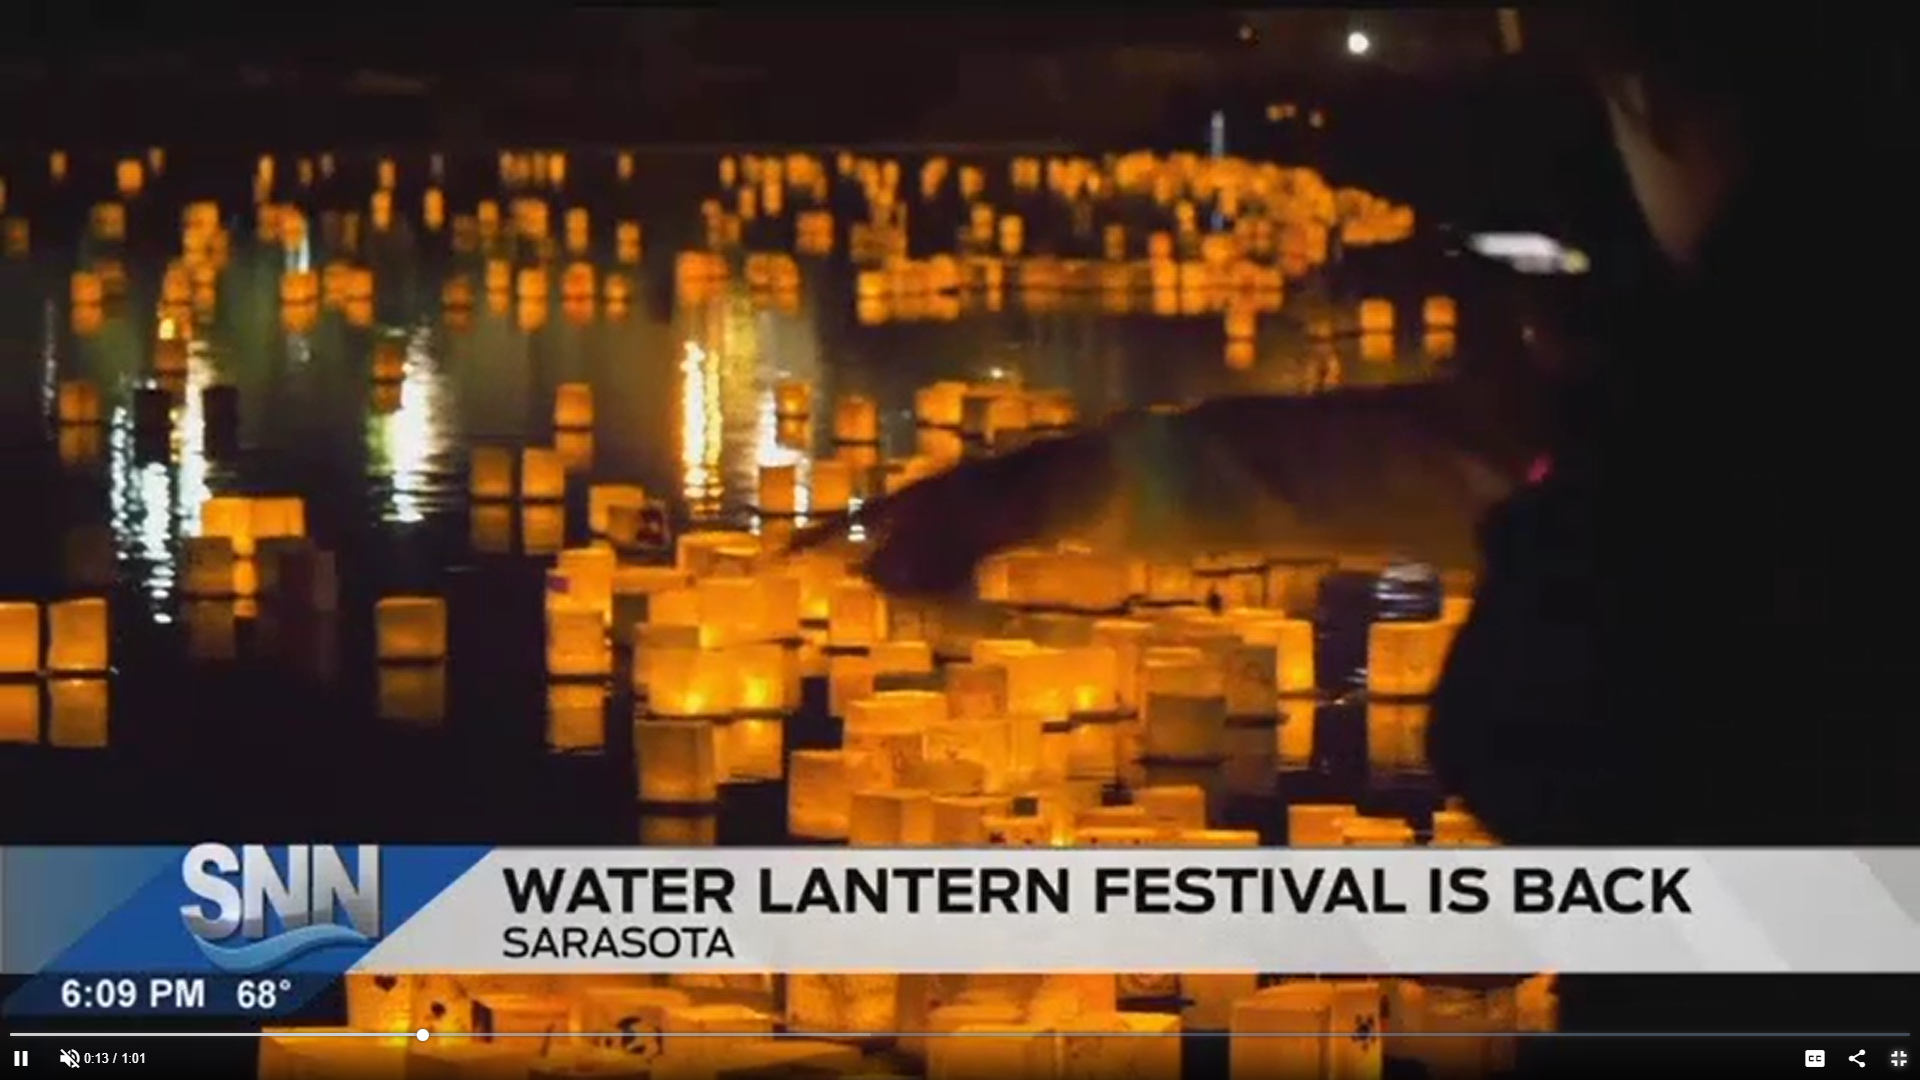 The 3rd annual Water Lantern Festival is Returning to Sarasota The